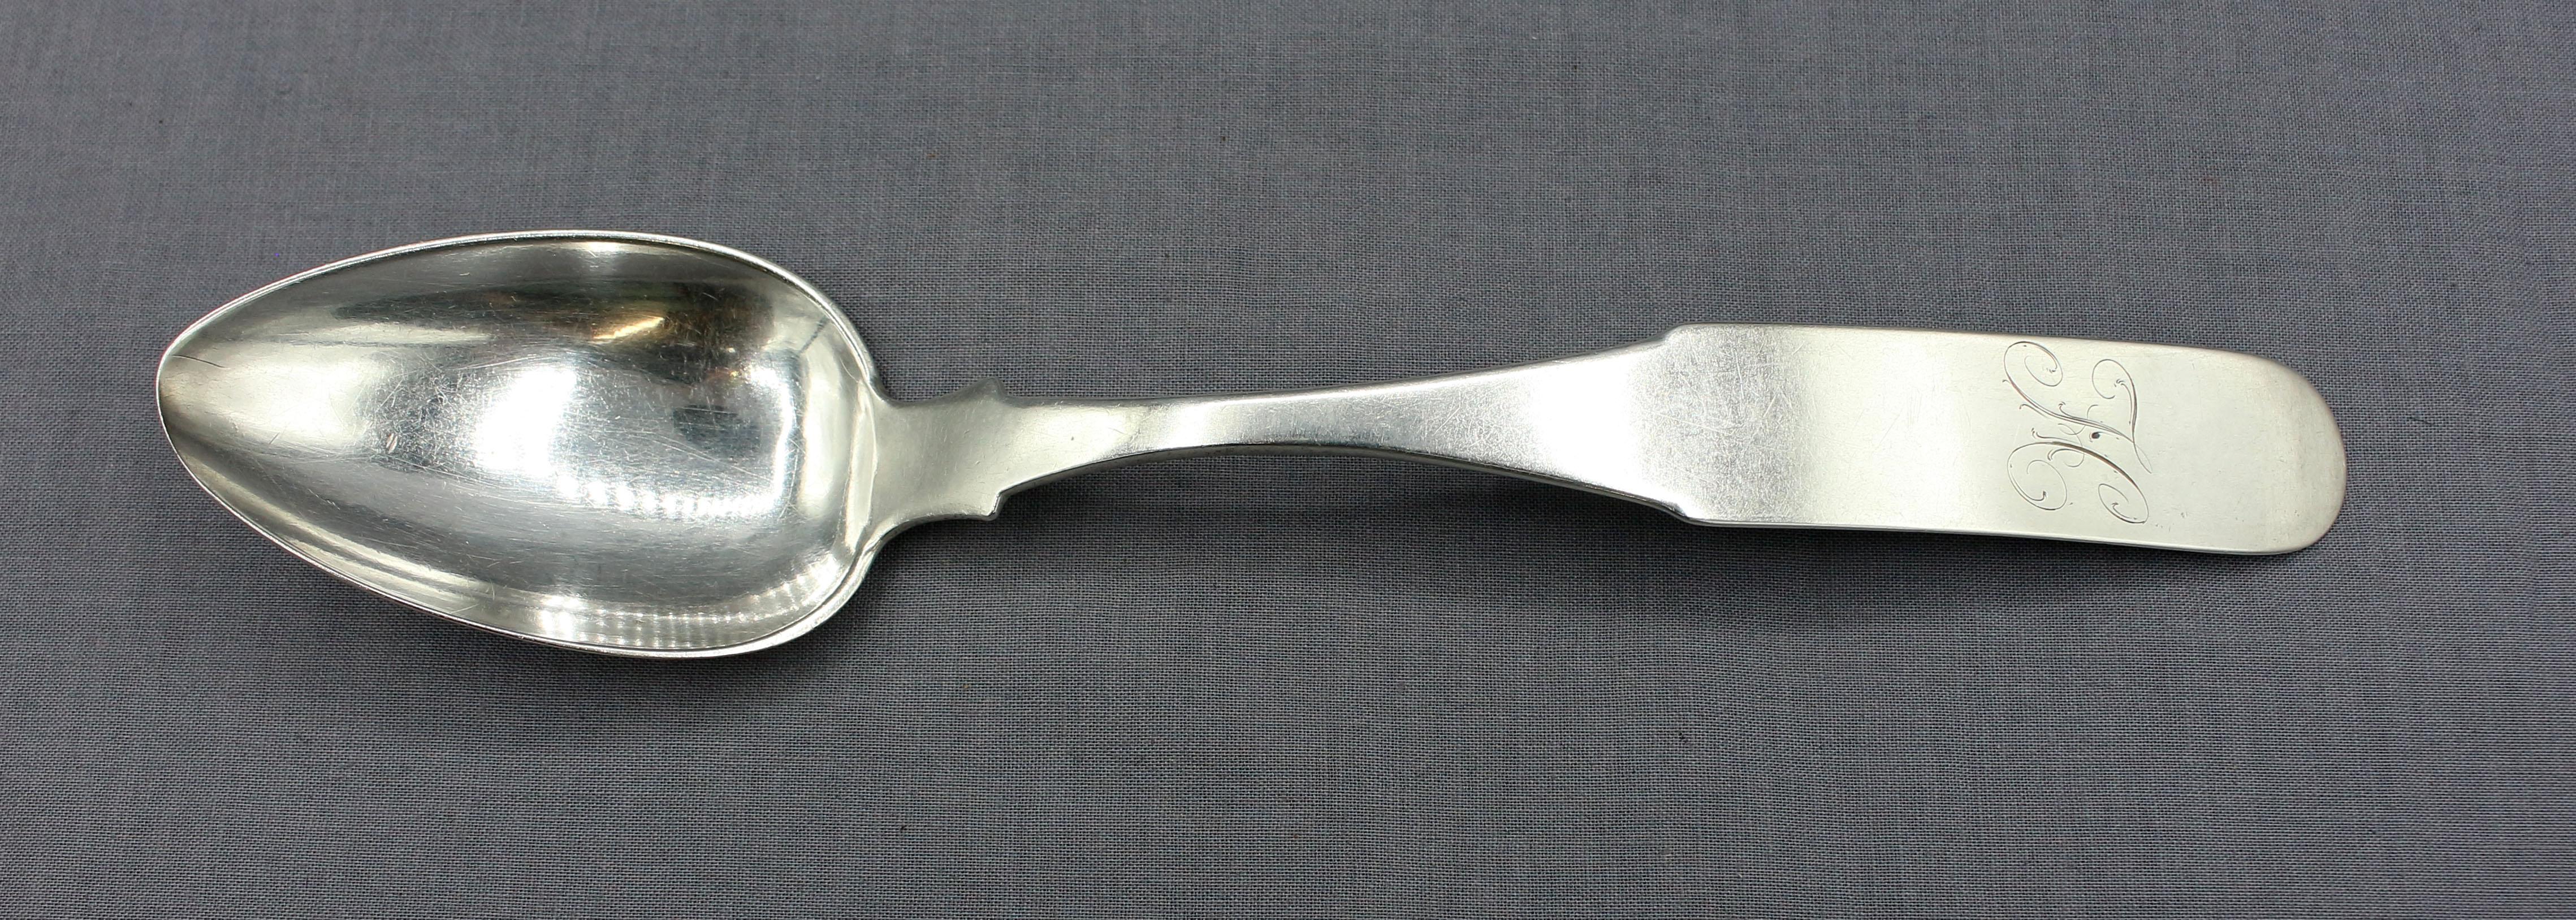 Set of 12 Baltimore, 1816, coin silver tablespoons by John Erwin. A superb set with the assay mark of that year to a purity of 91.66% (sterling is 92.5%). Given the popularity of soups & stews, these were primarily soup spoons of generous size.